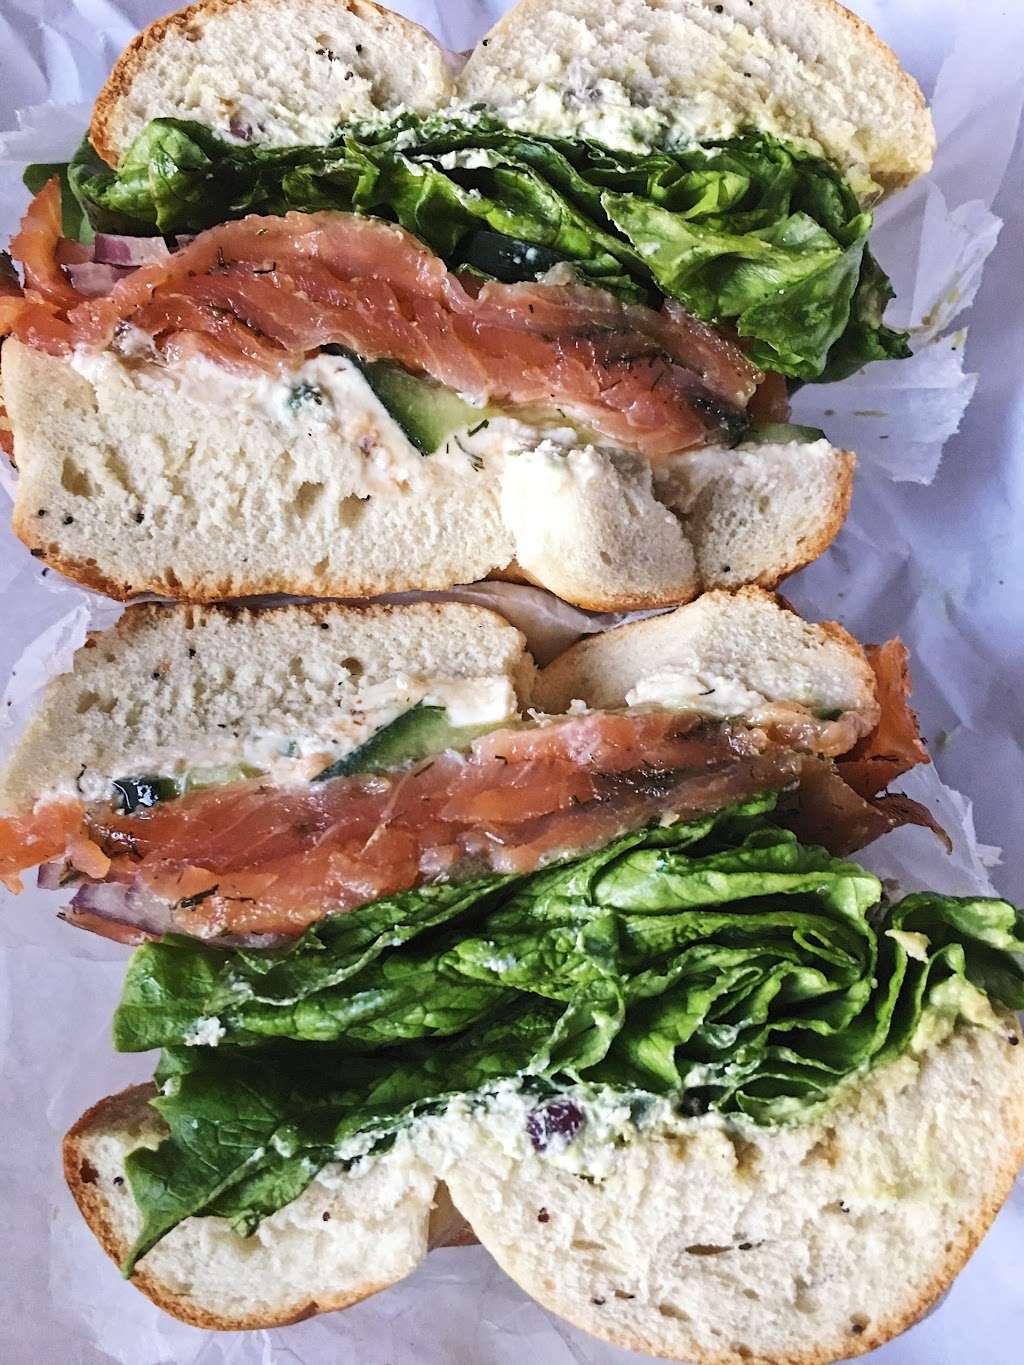 Tompkins Square Bagels | Photo 7 of 10 | Address: 165 Avenue A, New York, NY 10009, USA | Phone: (646) 351-6520